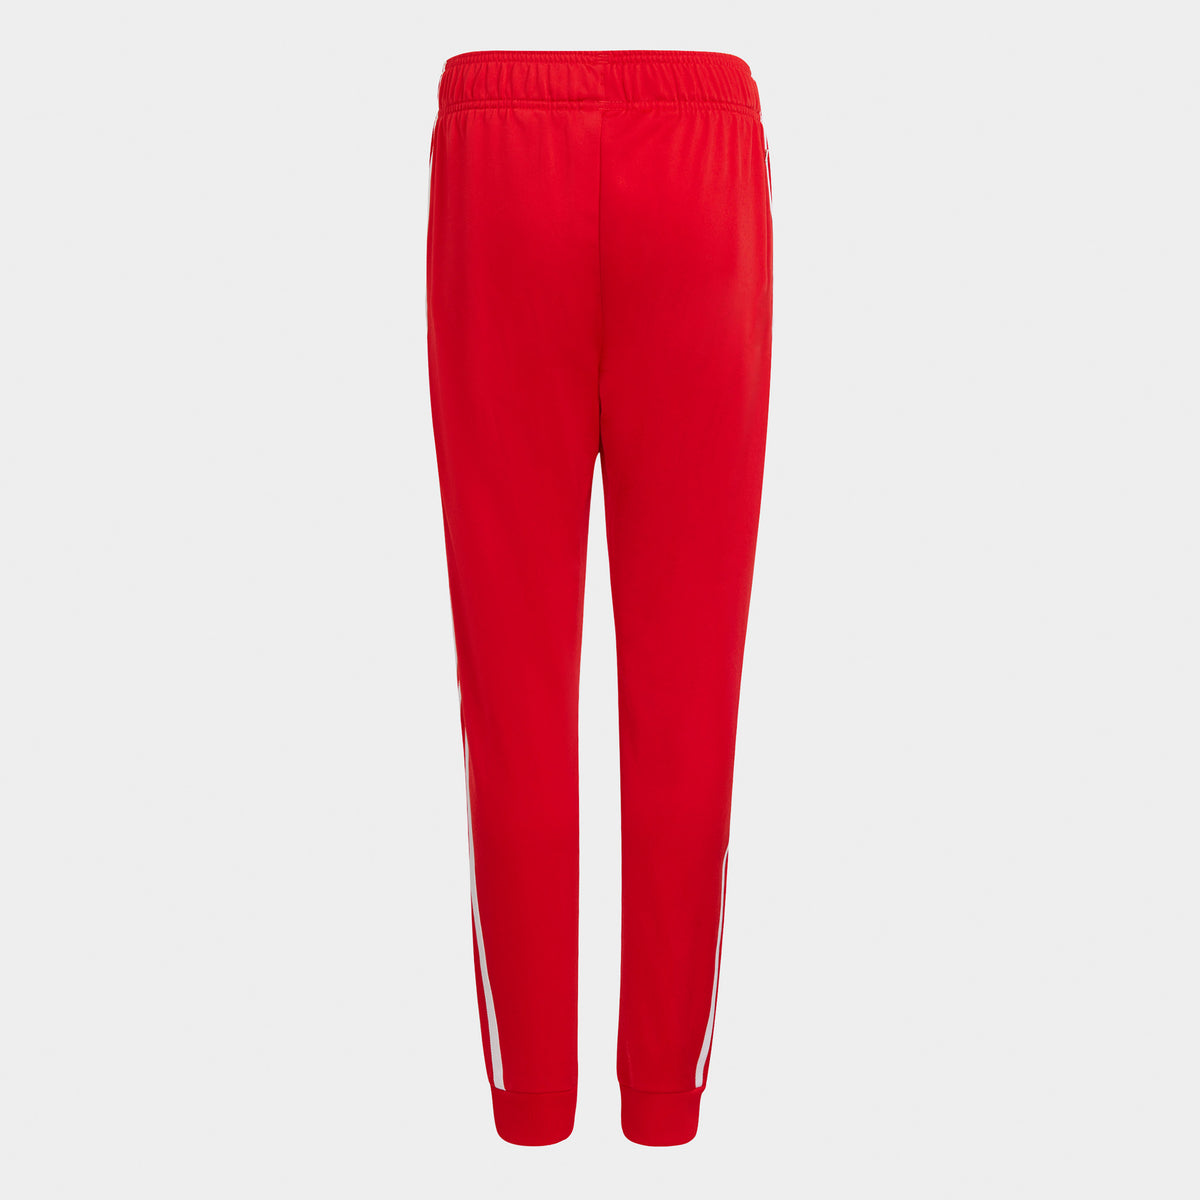 adidas Originals ADICOLOR HERITAGE NOW STRIPED TRACKSUIT BOTTOMS Red